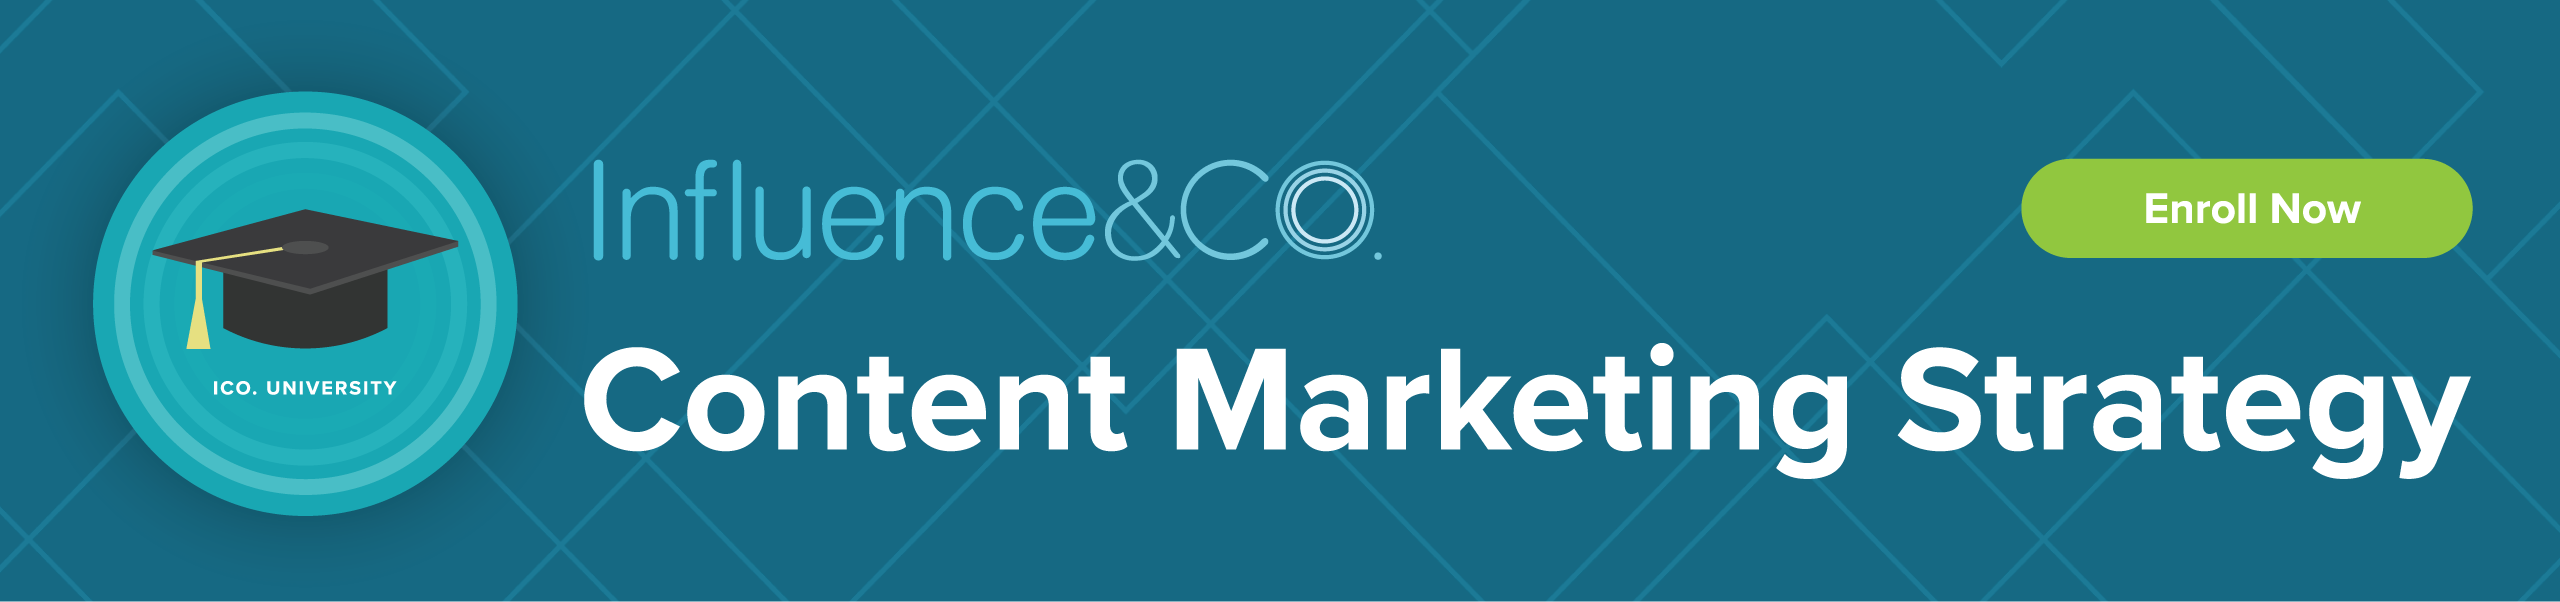 Influence&CO Content Marketing Strategy